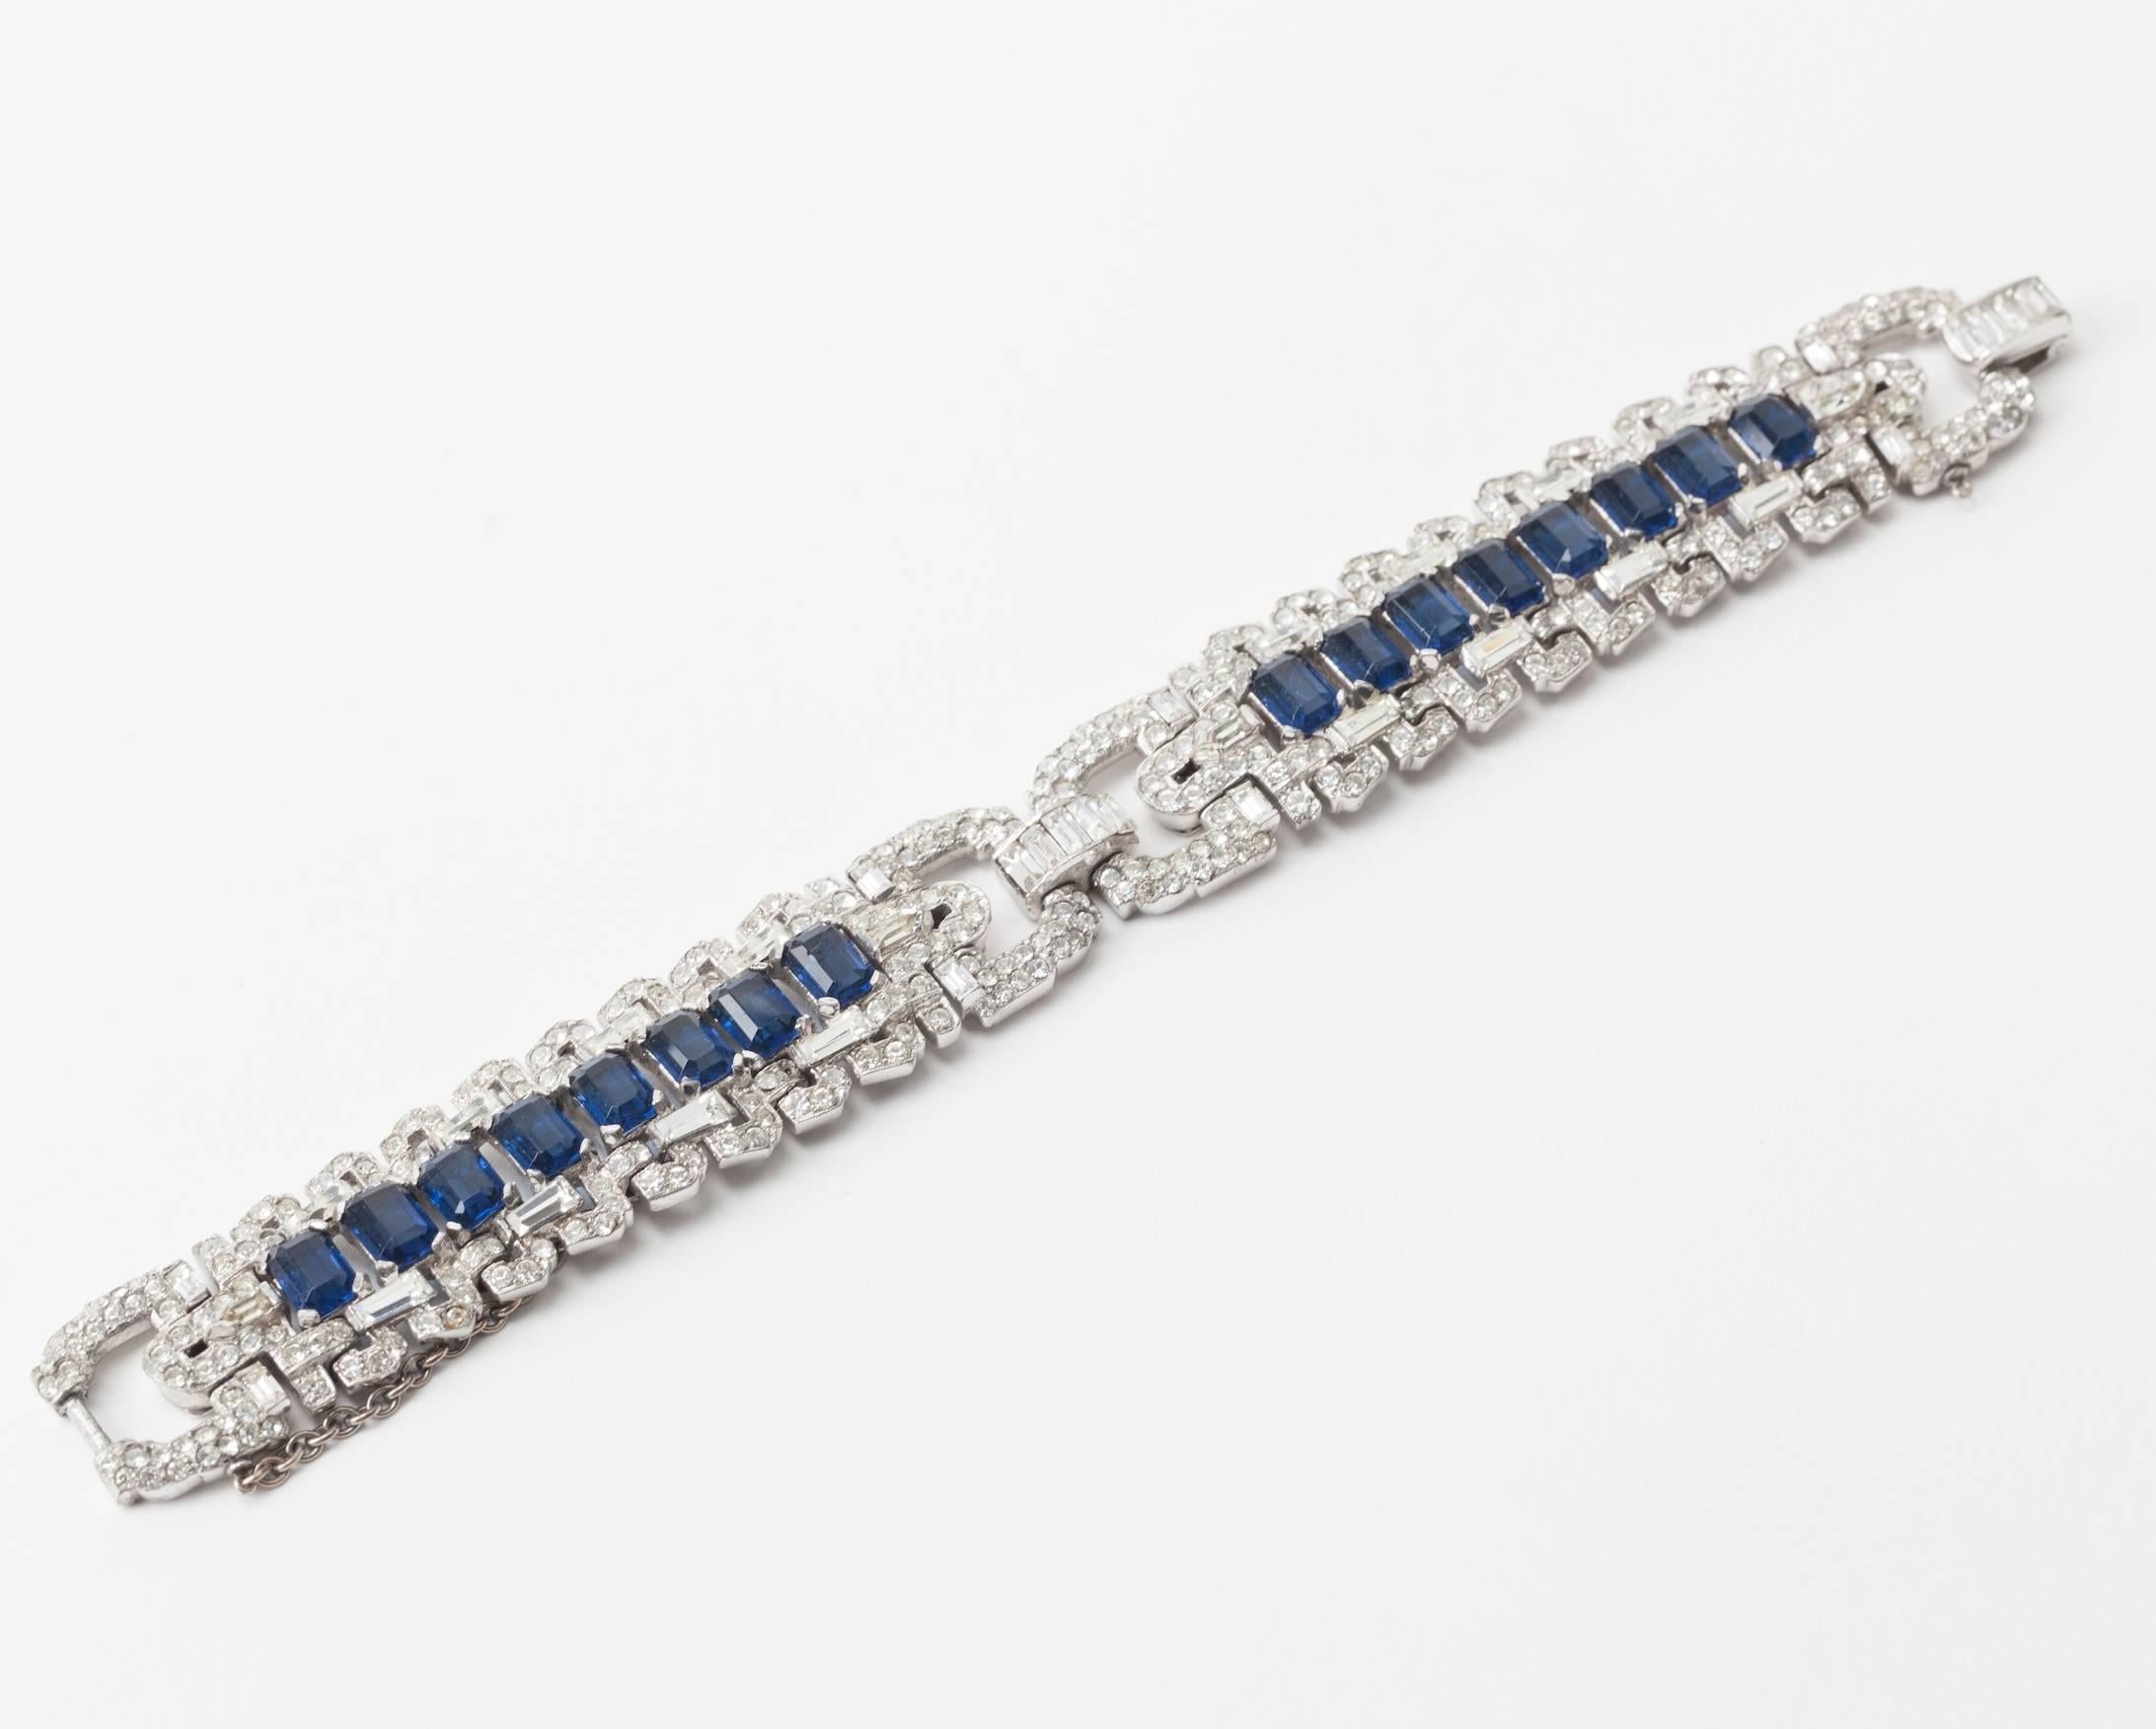 Spectacular Early Trifari Art Deco Bracelet from the 1930's in the high Art Deco taste. Beautiful quality designed likely by Alfred Phillipe for Trifari. Tight pave work with a row a central row of emerald cut faux sapphires. High rhodium finish.